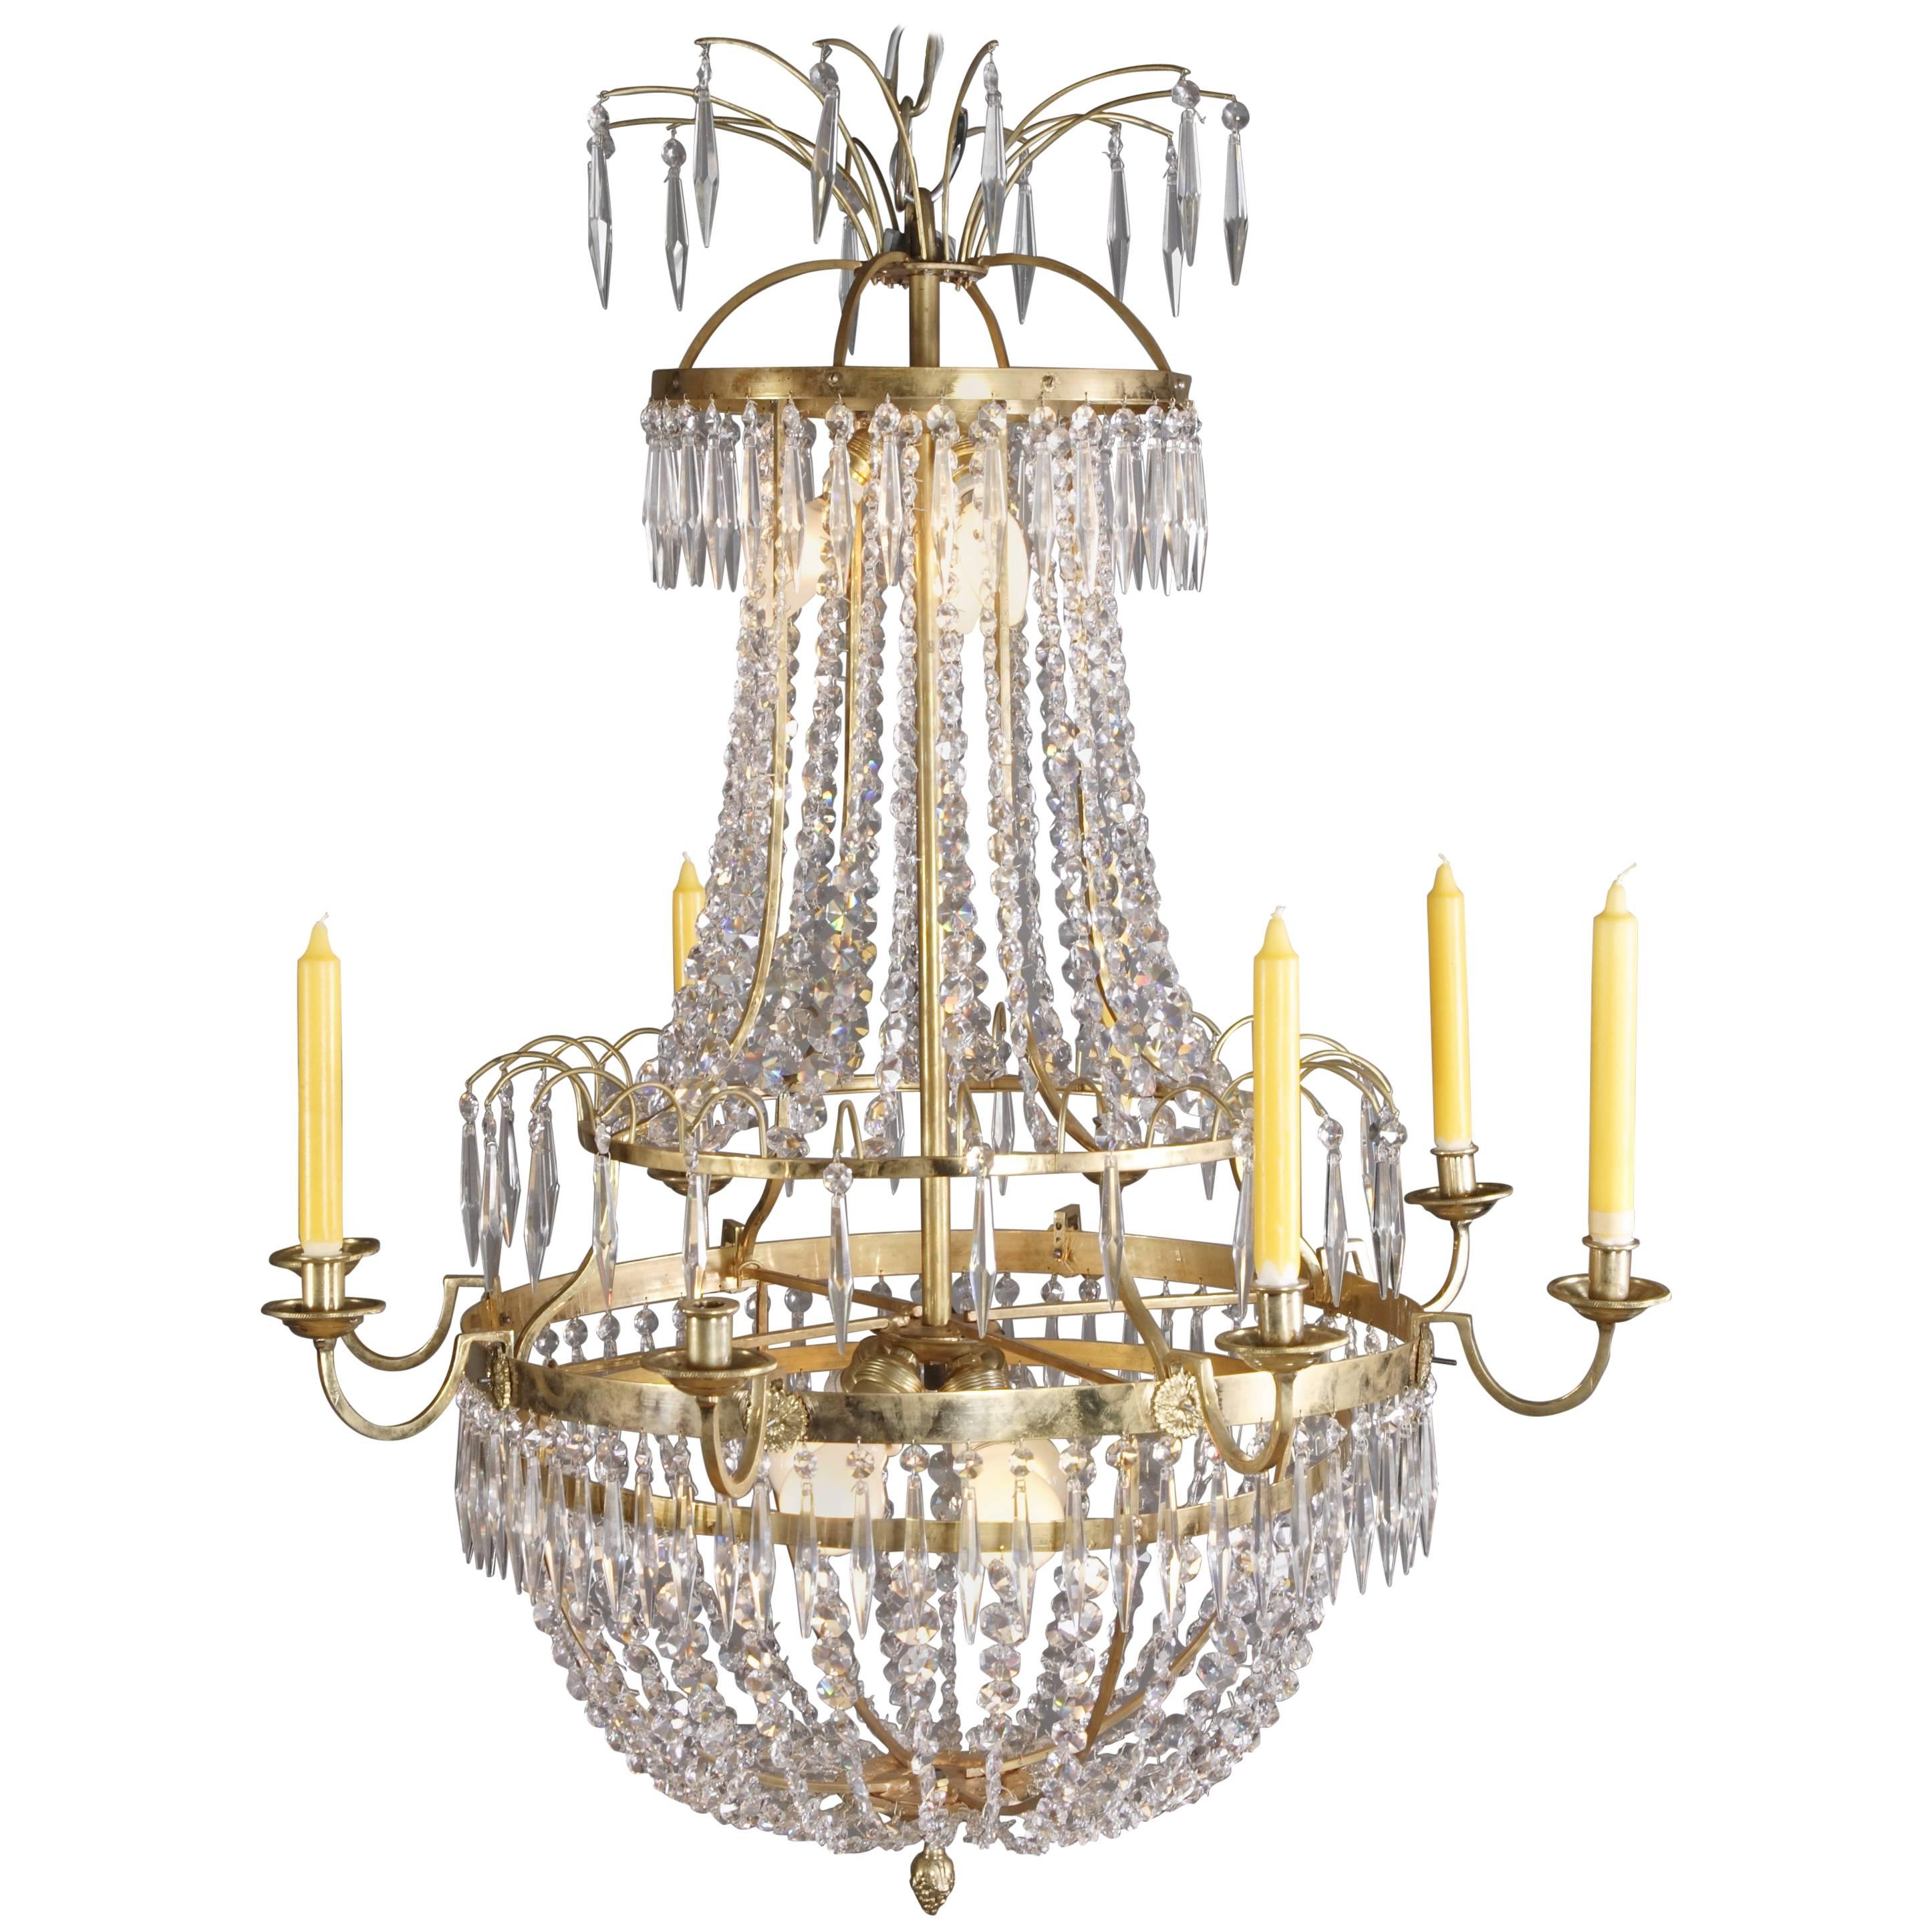 Antique Swedish Chandelier in Classicism Style